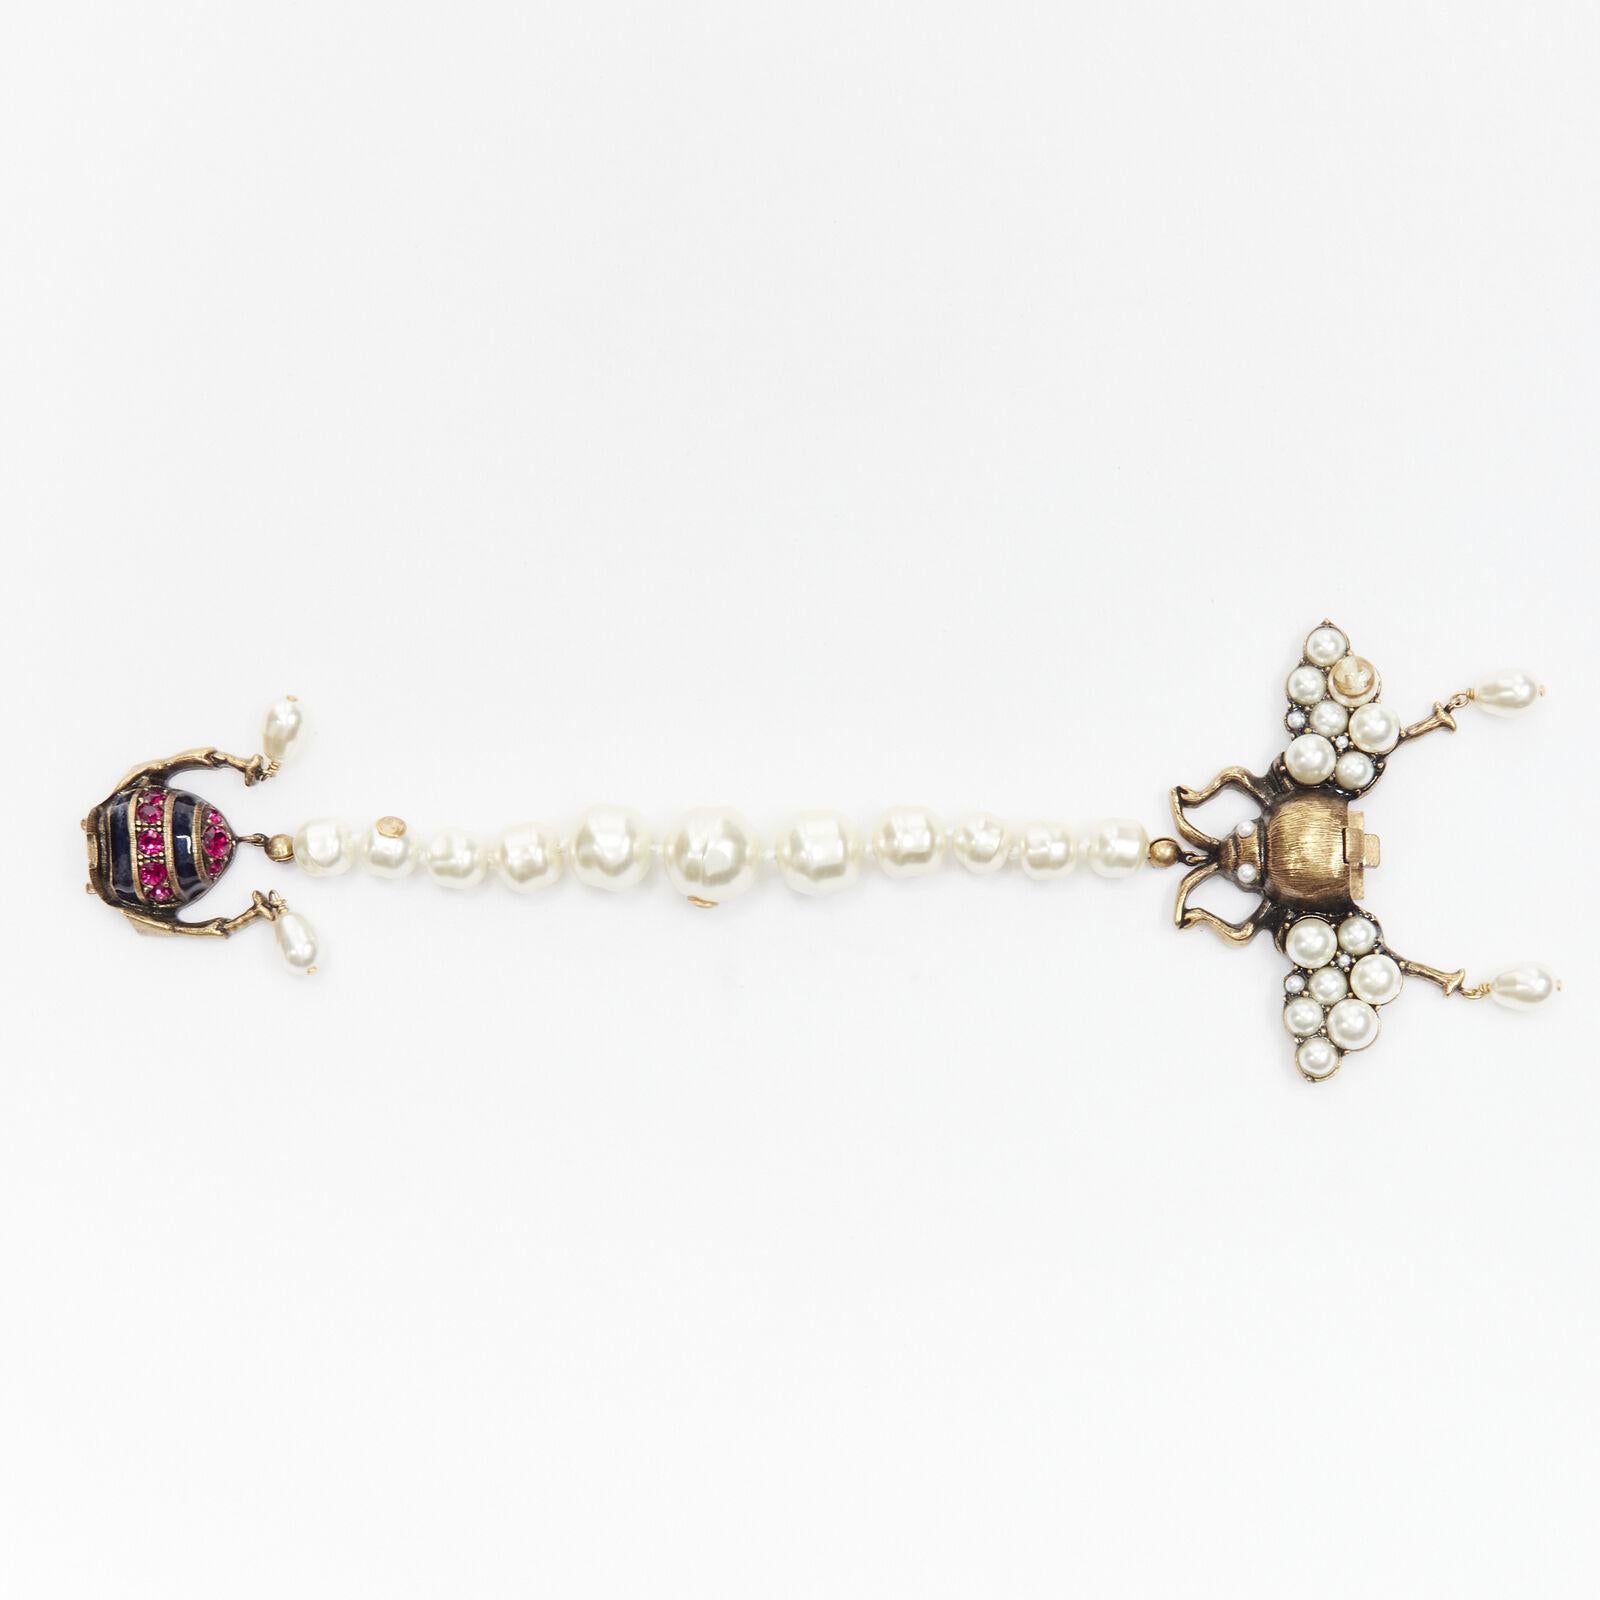 GUCCI ALESSANDRO MICHELE gold crystal enamel Bee faux pearl GG logo bracelet
Reference: TGAS/C01501
Brand: Gucci
Designer: Alessandro Michele
Material: Metal, Faux Pearl
Color: White, Multicolour
Pattern: Solid
Closure: Push Clasp
Extra Details: